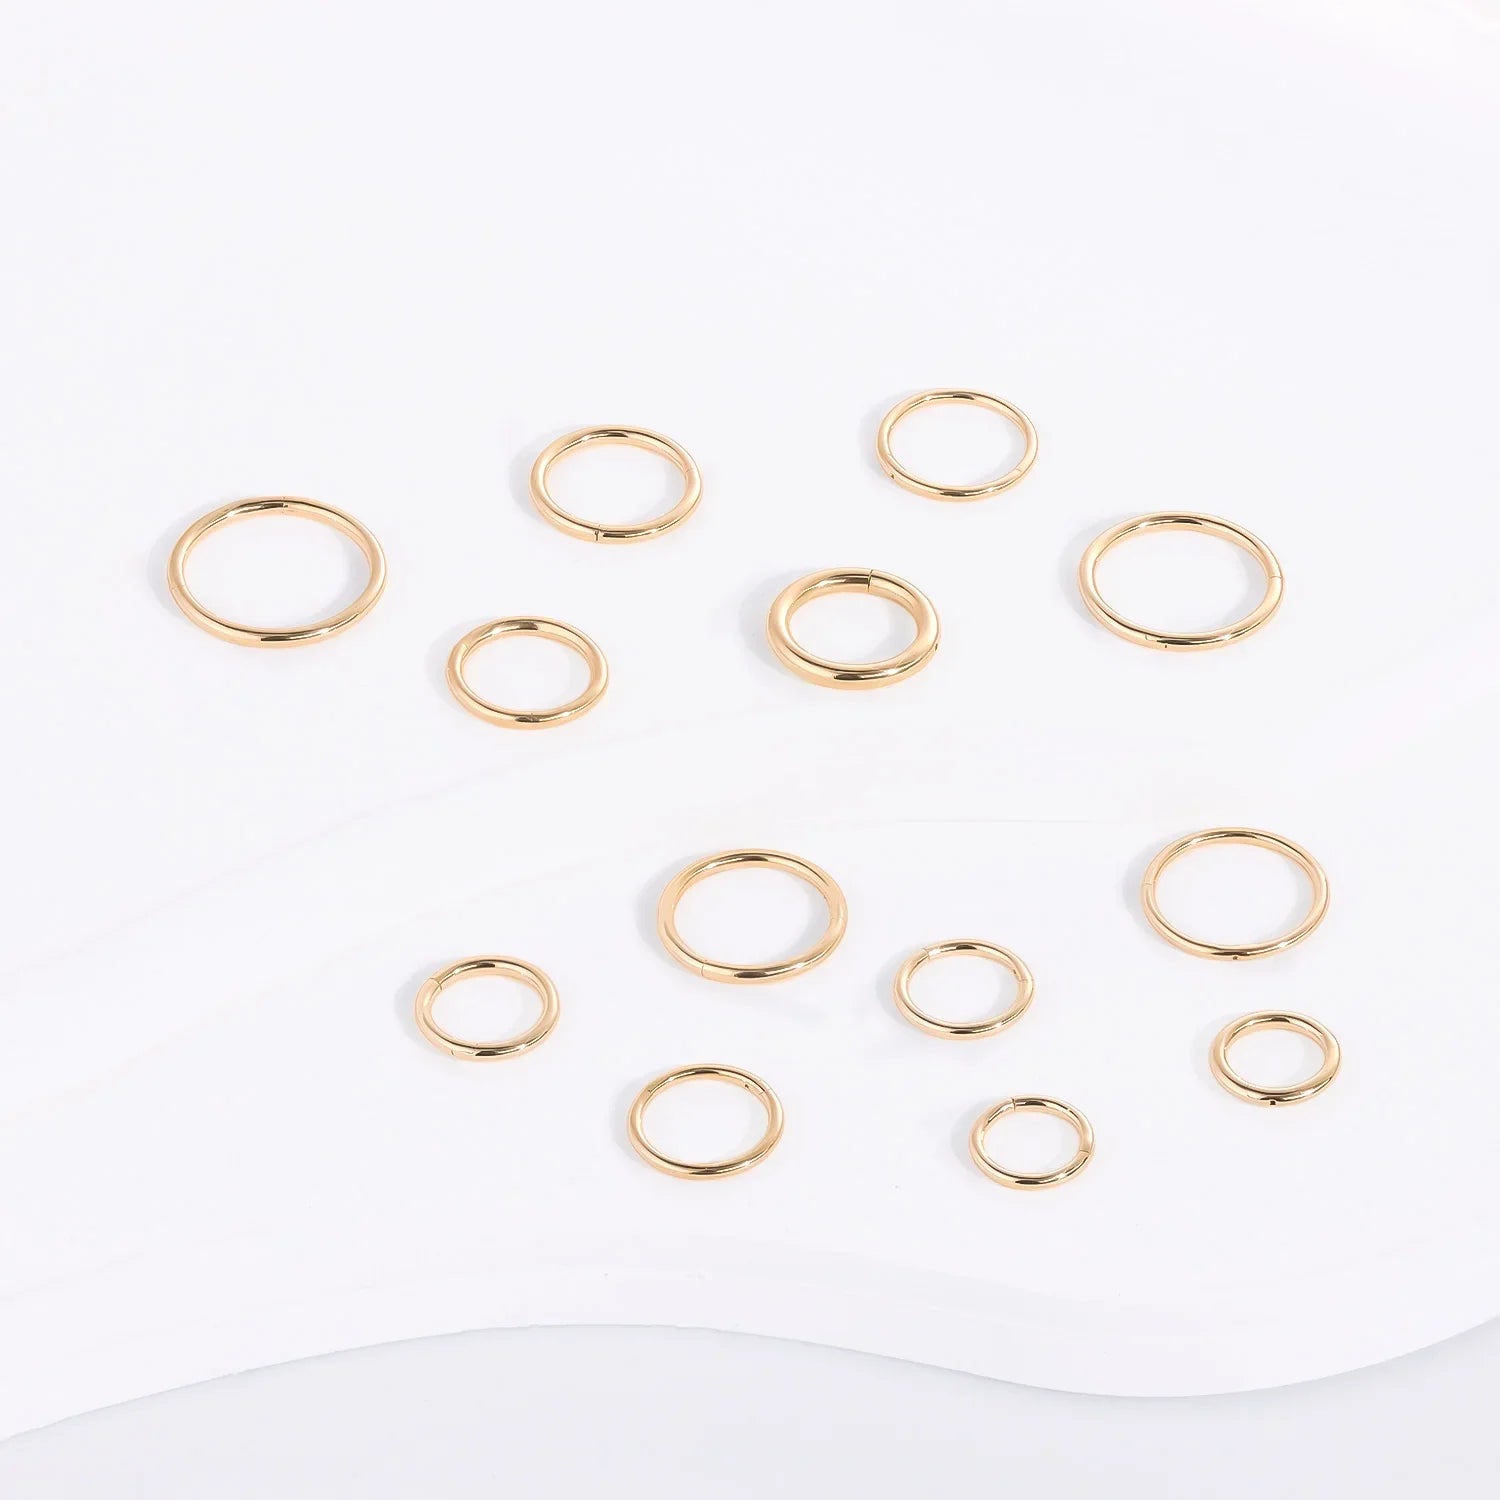 14K gold nose hoop nose clicker ring septum ring solid gold ear piercing Ashley Piercing Jewelry